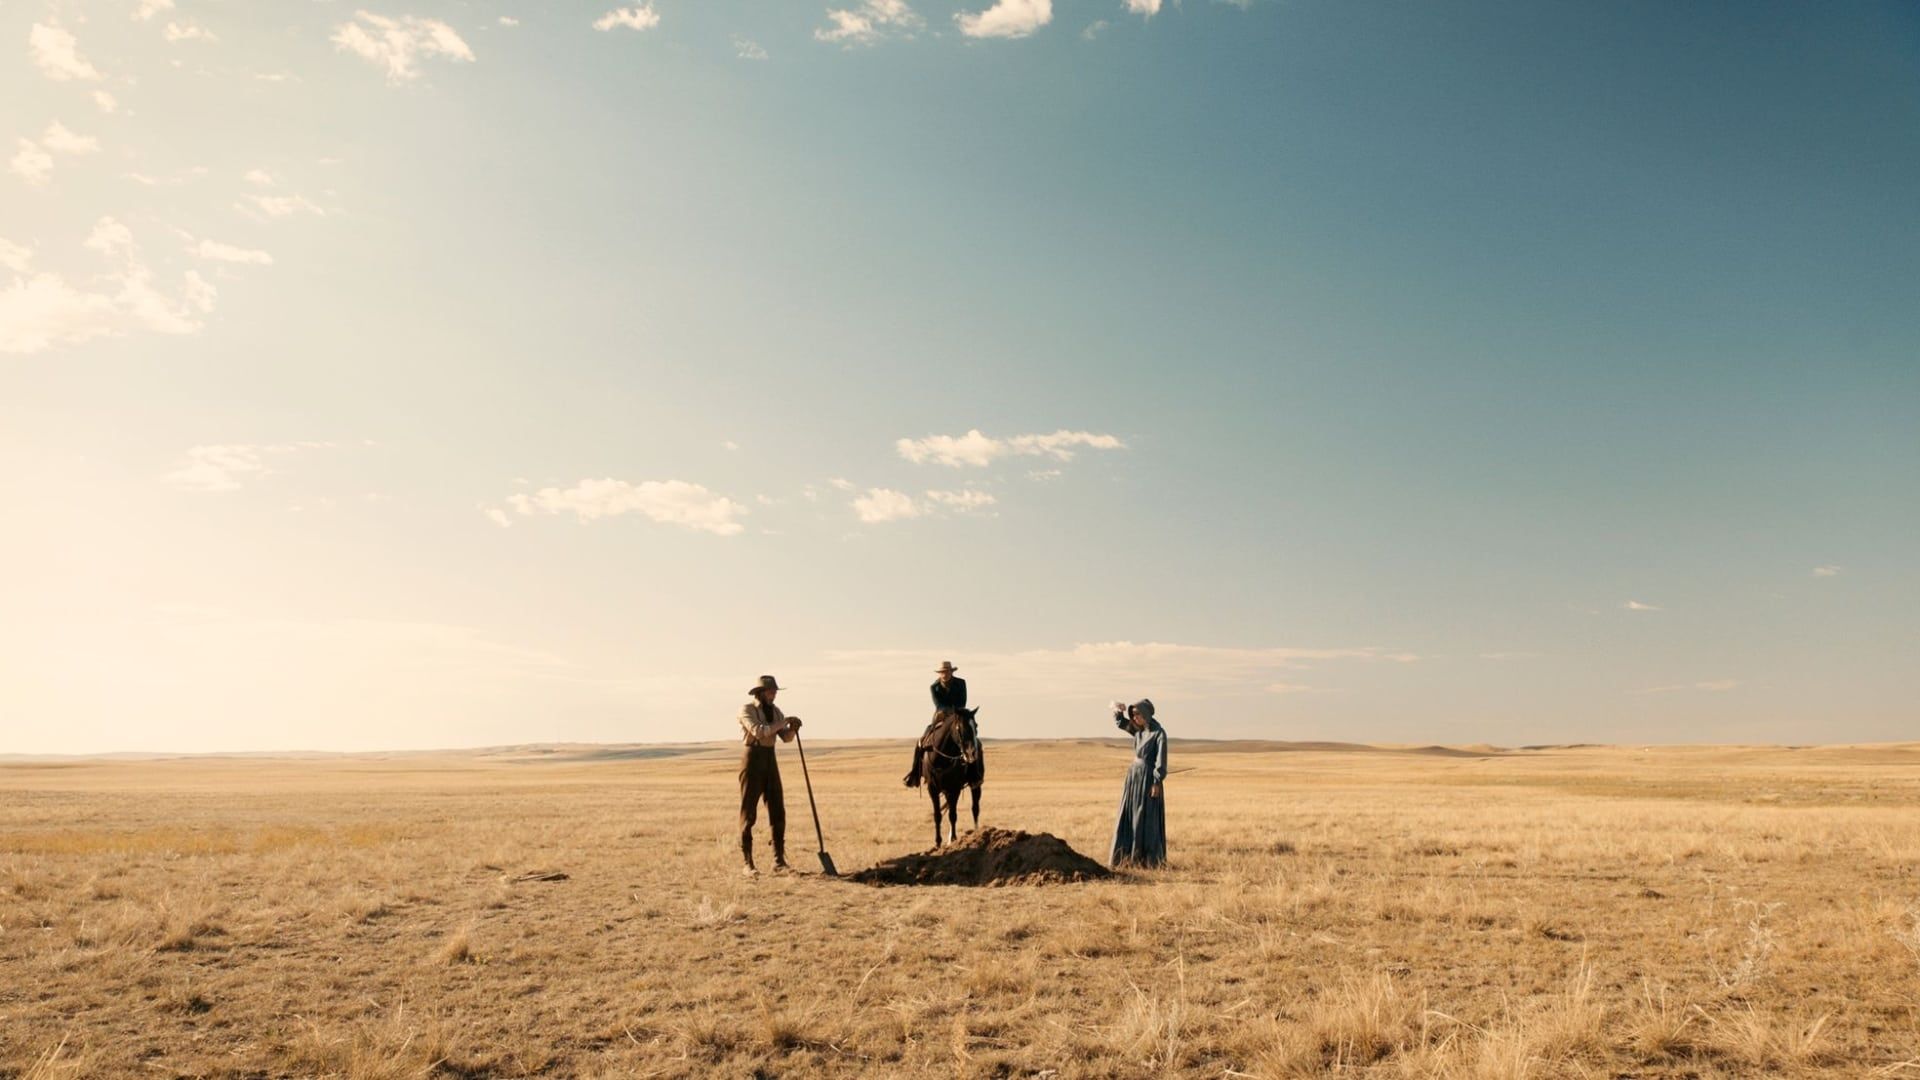 The Ballad of Buster Scruggs background